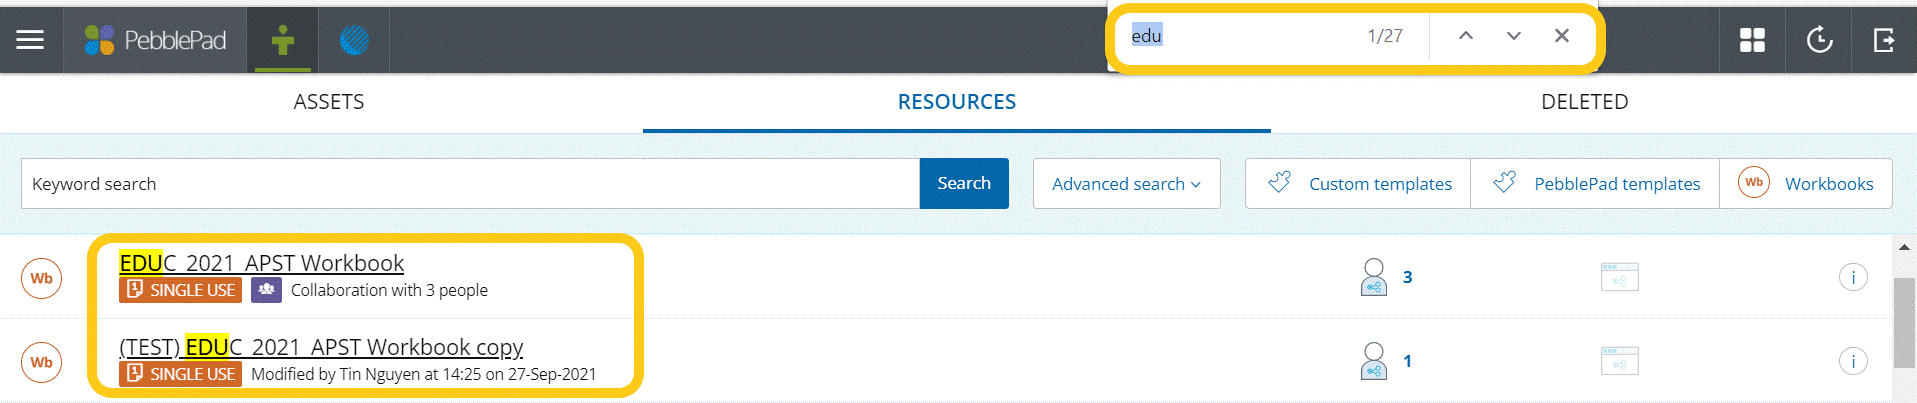 Ctrl F search for “edu” in the Resources Store on PebblePad